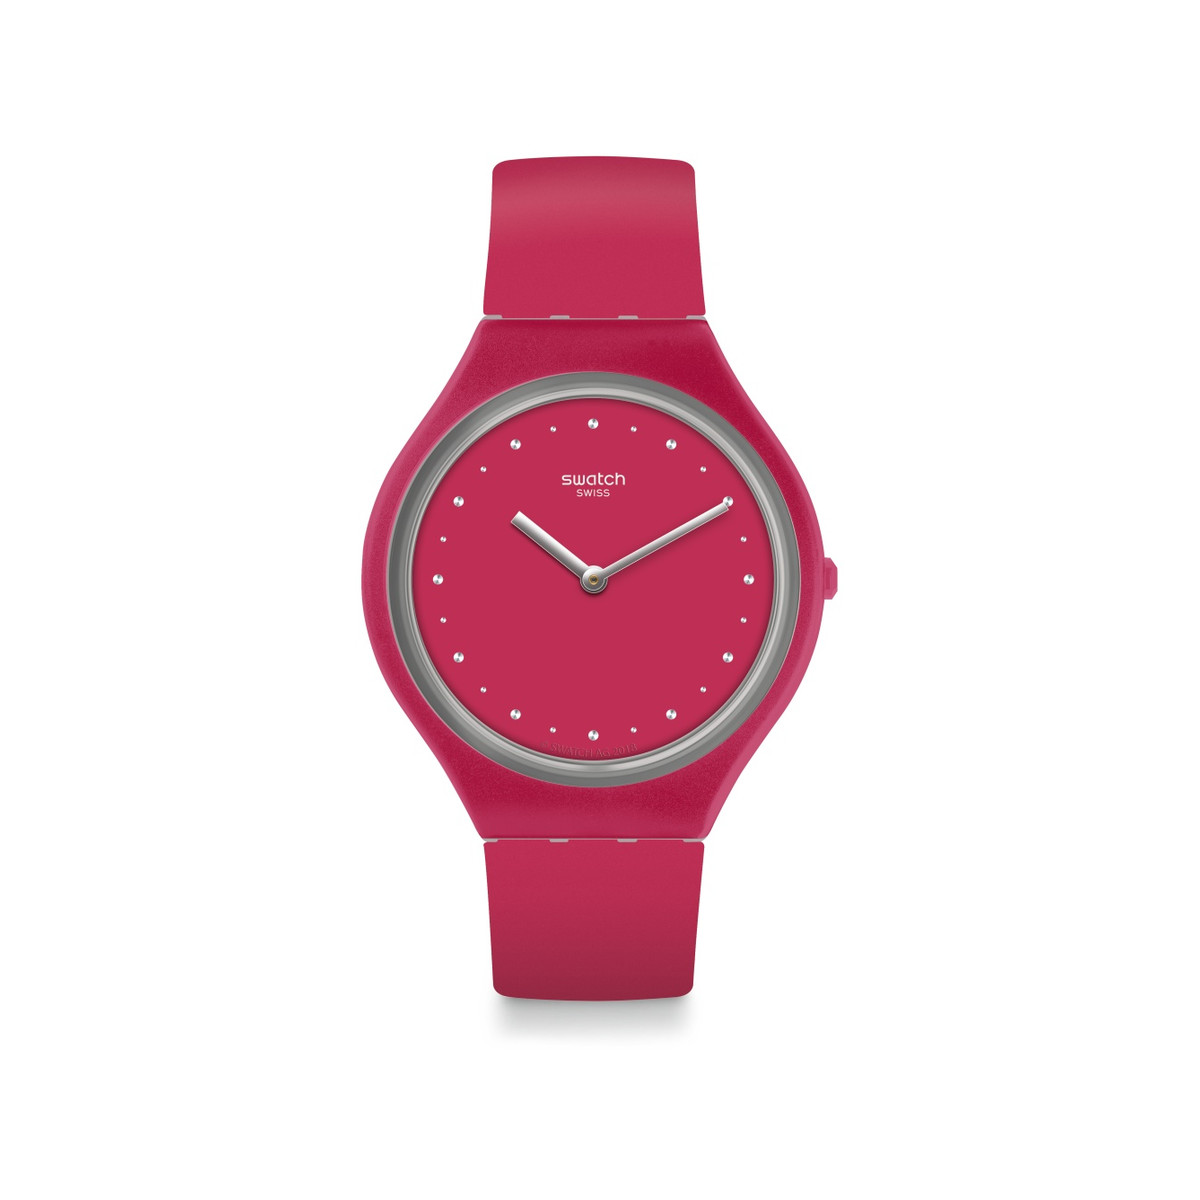 Montre Swatch mixte silicone rose